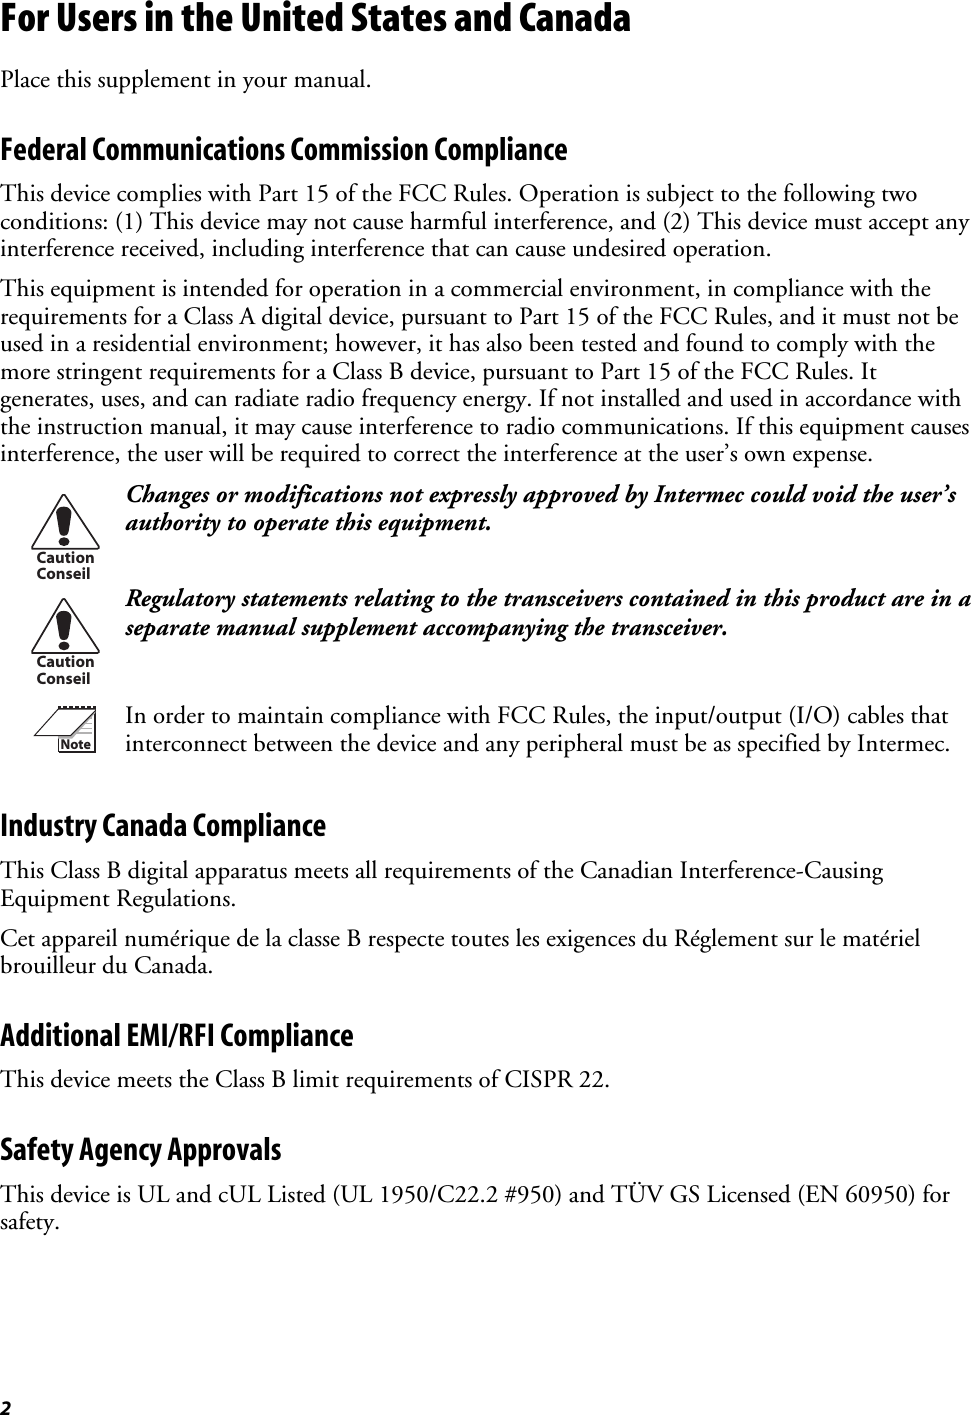 2For Users in the United States and CanadaPlace this supplement in your manual.Federal Communications Commission ComplianceThis device complies with Part 15 of the FCC Rules. Operation is subject to the following twoconditions: (1) This device may not cause harmful interference, and (2) This device must accept anyinterference received, including interference that can cause undesired operation.This equipment is intended for operation in a commercial environment, in compliance with therequirements for a Class A digital device, pursuant to Part 15 of the FCC Rules, and it must not beused in a residential environment; however, it has also been tested and found to comply with themore stringent requirements for a Class B device, pursuant to Part 15 of the FCC Rules. Itgenerates, uses, and can radiate radio frequency energy. If not installed and used in accordance withthe instruction manual, it may cause interference to radio communications. If this equipment causesinterference, the user will be required to correct the interference at the user’s own expense.CautionConseilChanges or modifications not expressly approved by Intermec could void the user’sauthority to operate this equipment.CautionConseilRegulatory statements relating to the transceivers contained in this product are in aseparate manual supplement accompanying the transceiver.NoteIn order to maintain compliance with FCC Rules, the input/output (I/O) cables thatinterconnect between the device and any peripheral must be as specified by Intermec.Industry Canada ComplianceThis Class B digital apparatus meets all requirements of the Canadian Interference-CausingEquipment Regulations.Cet appareil numérique de la classe B respecte toutes les exigences du Réglement sur le matérielbrouilleur du Canada.Additional EMI/RFI ComplianceThis device meets the Class B limit requirements of CISPR 22.Safety Agency ApprovalsThis device is UL and cUL Listed (UL 1950/C22.2 #950) and TÜV GS Licensed (EN 60950) forsafety.